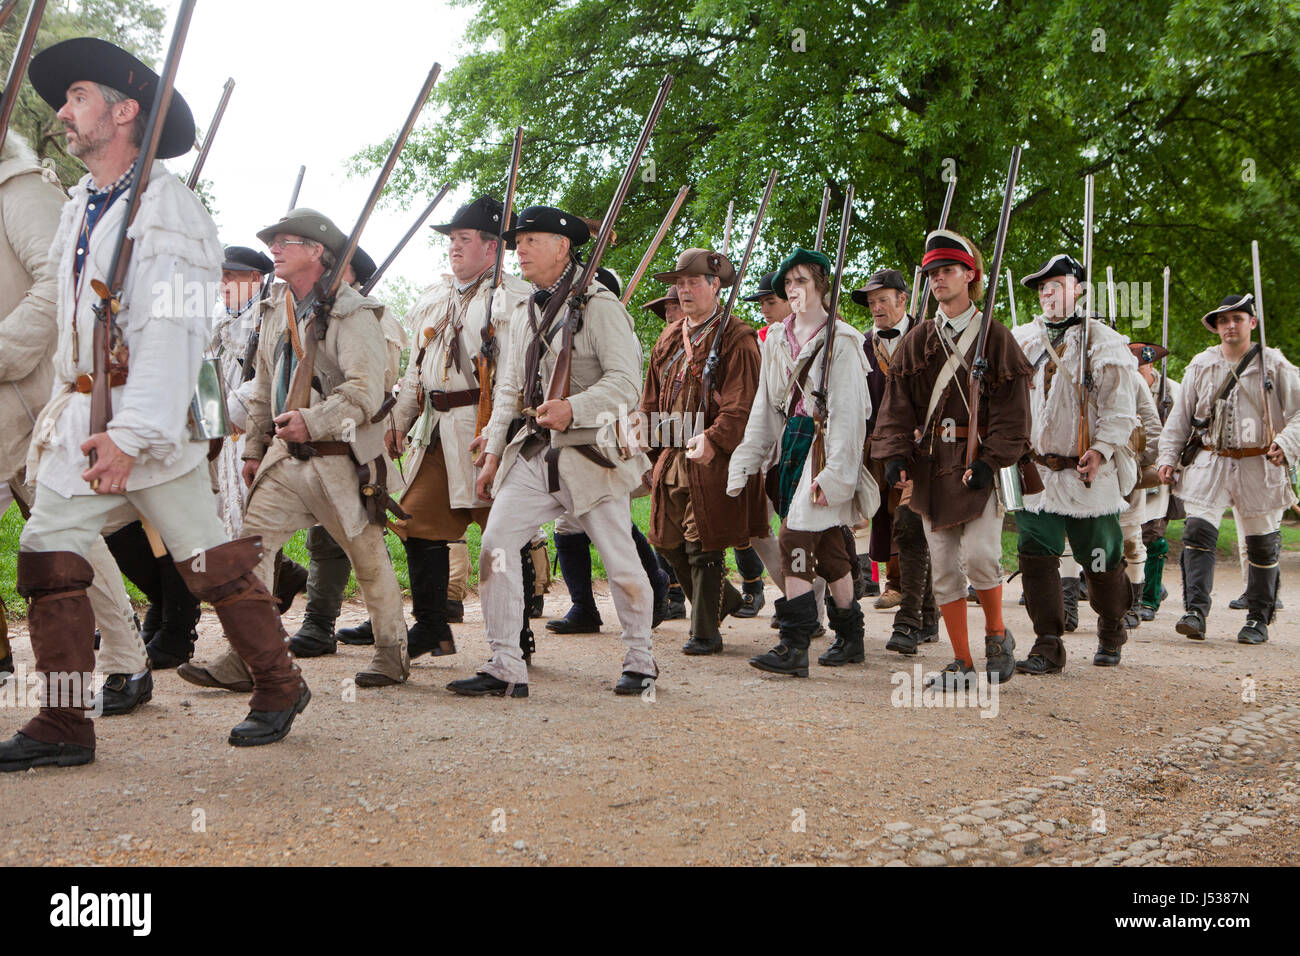 American soldiers in the American Revolutionary War reenactment - Virginia USA Stock Photo